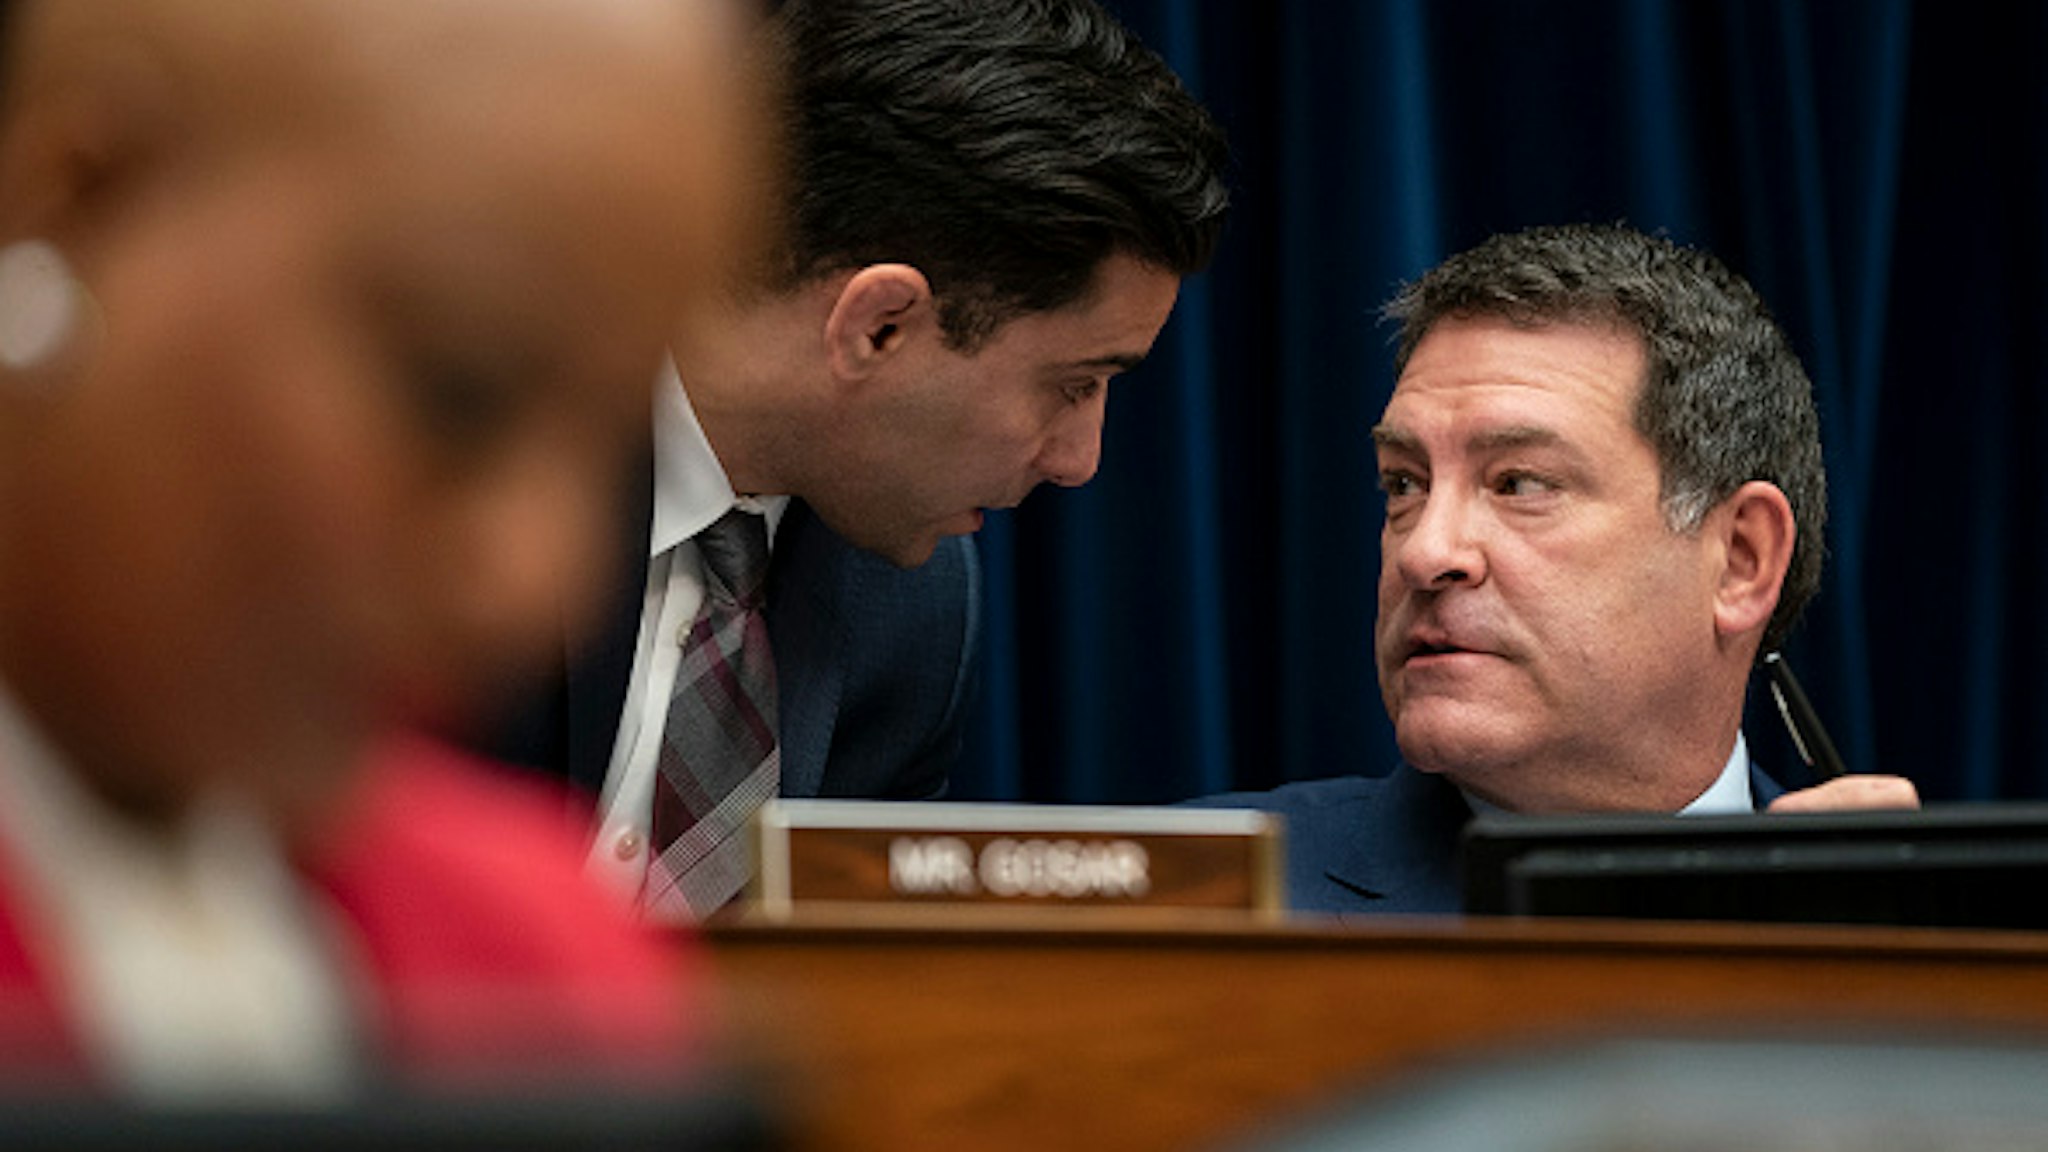 WASHINGTON, DC - MARCH 11: U.S. Rep. Mark Green (R-TN) confers with an aide during a House Oversight And Reform Committee hearing concerning government preparedness and response to the coronavirus, in the Rayburn House Office Building on Capitol Hill March 11, 2020 in Washington, DC. Since December 2019, coronavirus (COVID-19) has infected more than 109,000 people and killed more than 3,800 people in 105 countries.